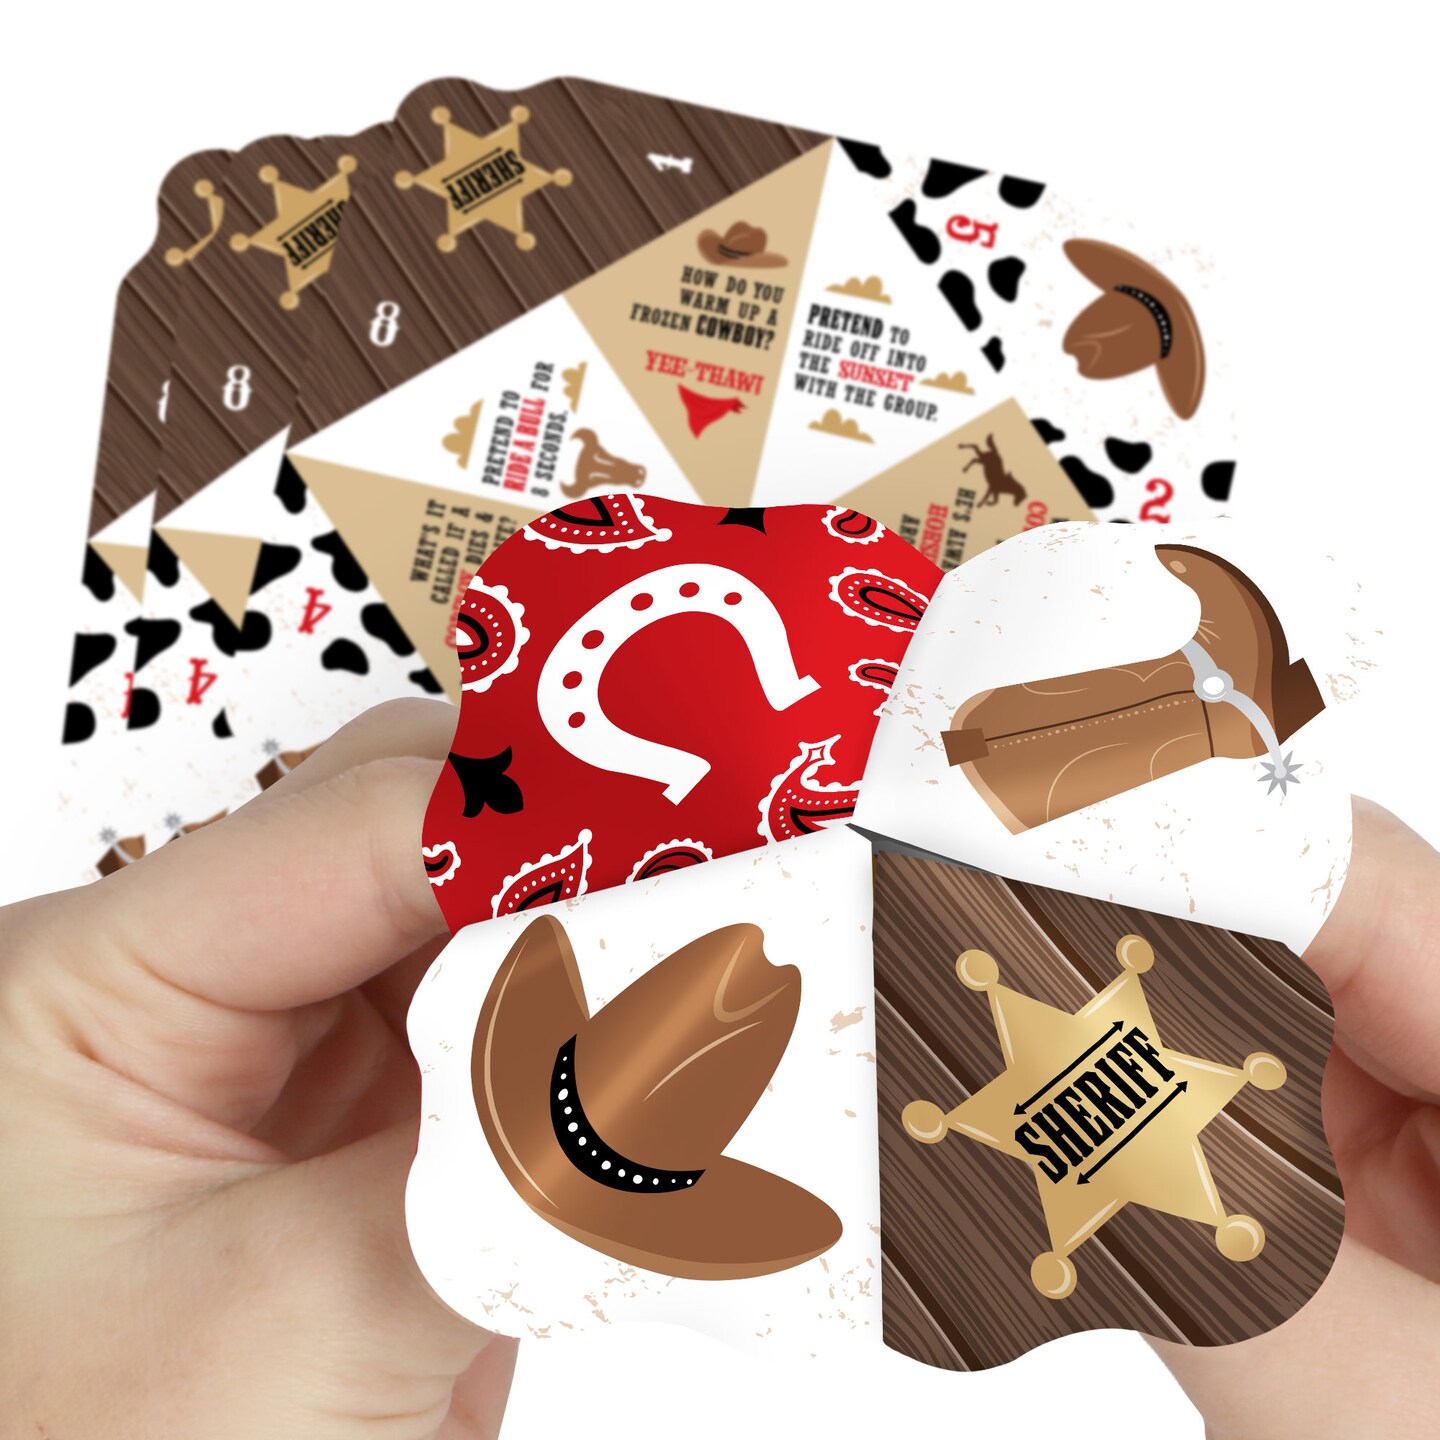 Big Dot of Happiness Western Hoedown - Wild West Cowboy Party Cootie Catcher Game - Jokes and Dares Fortune Tellers - Set of 12